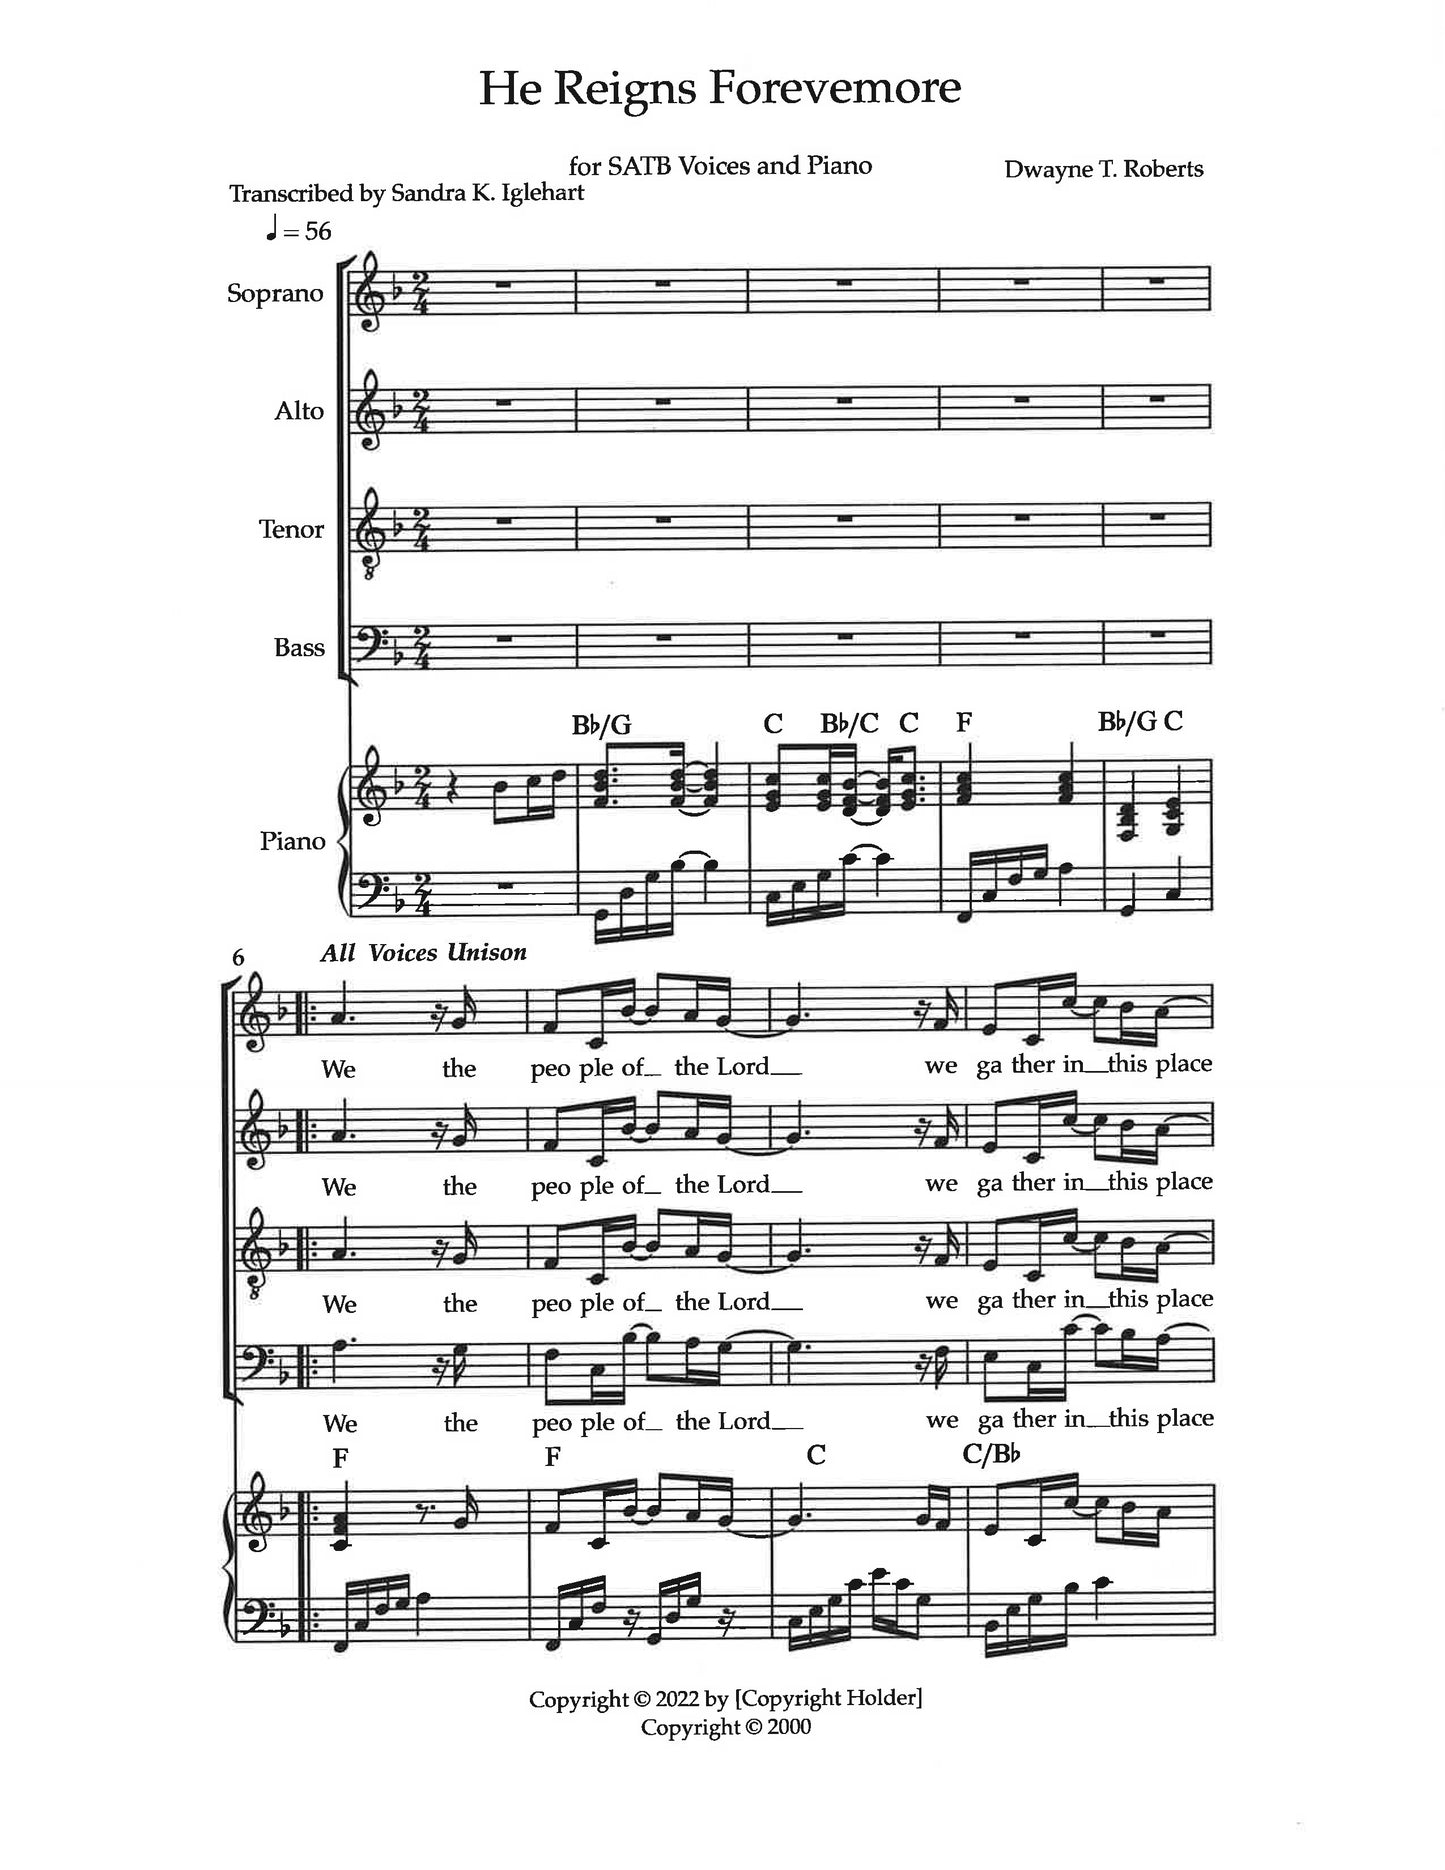 He Reigns Forevermore by Dwayne Roberts (Sheet Music)